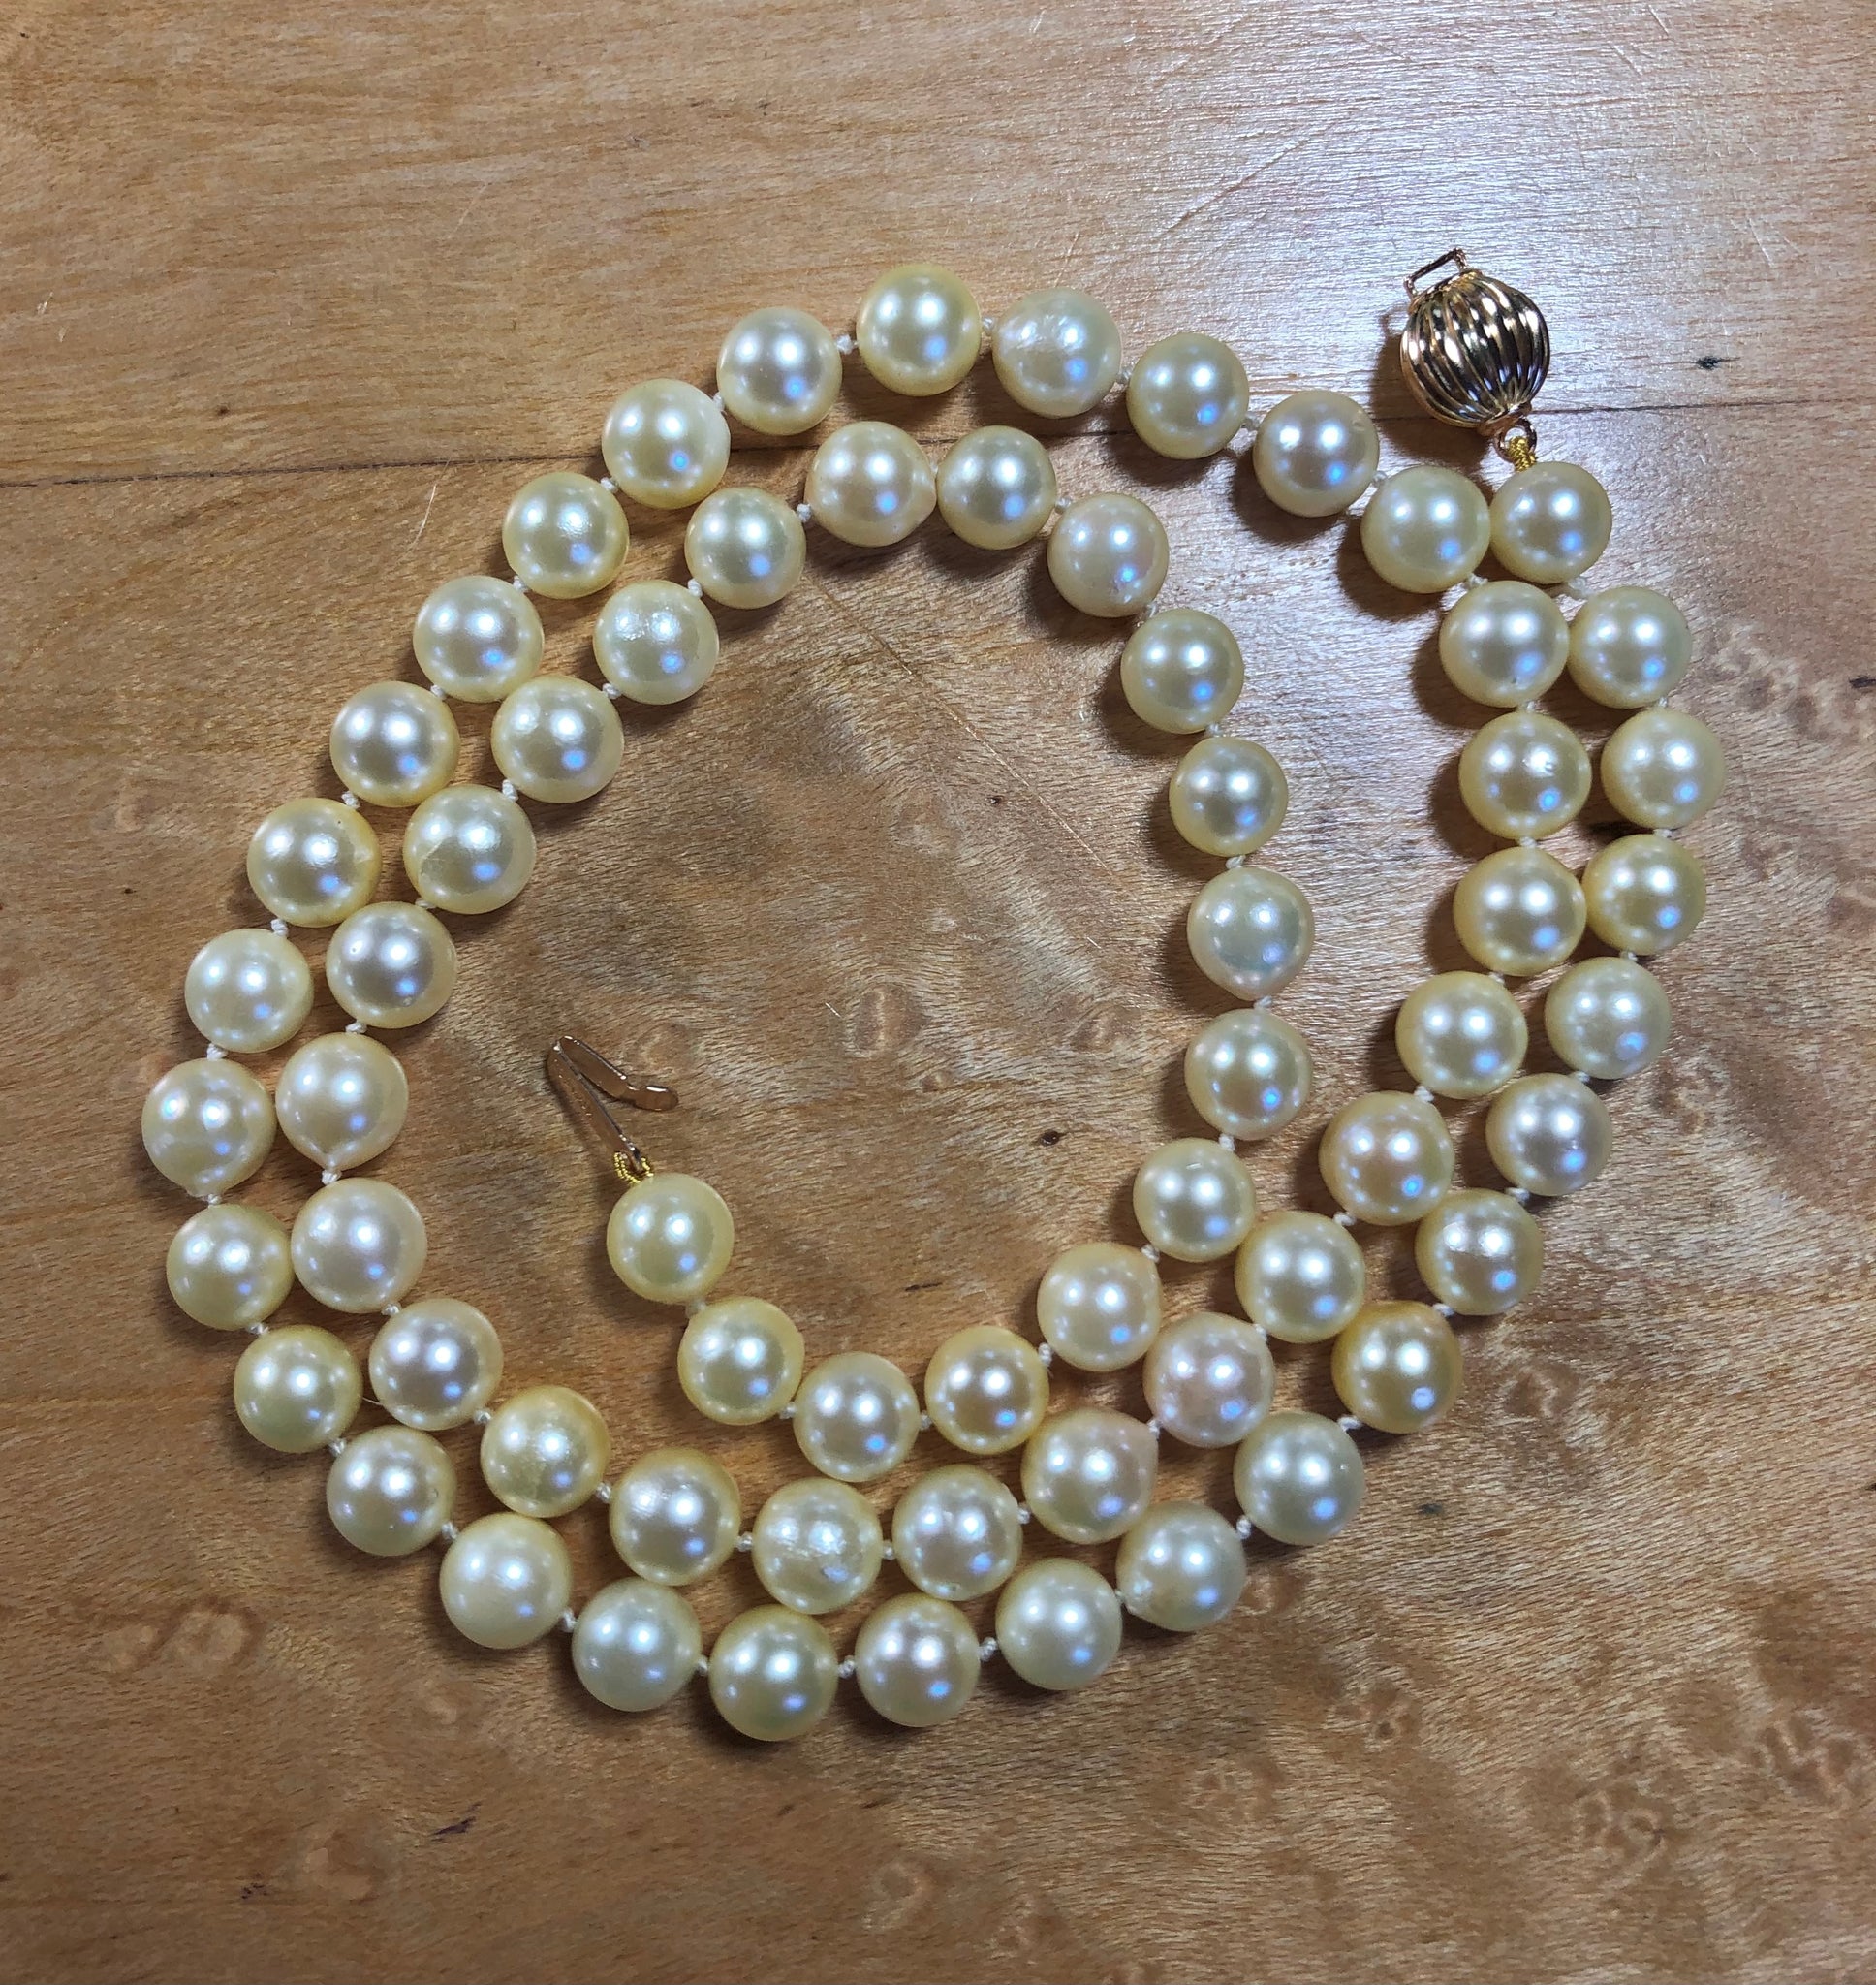 Japanese Akoya Pearl Necklace Gold 19 Inches